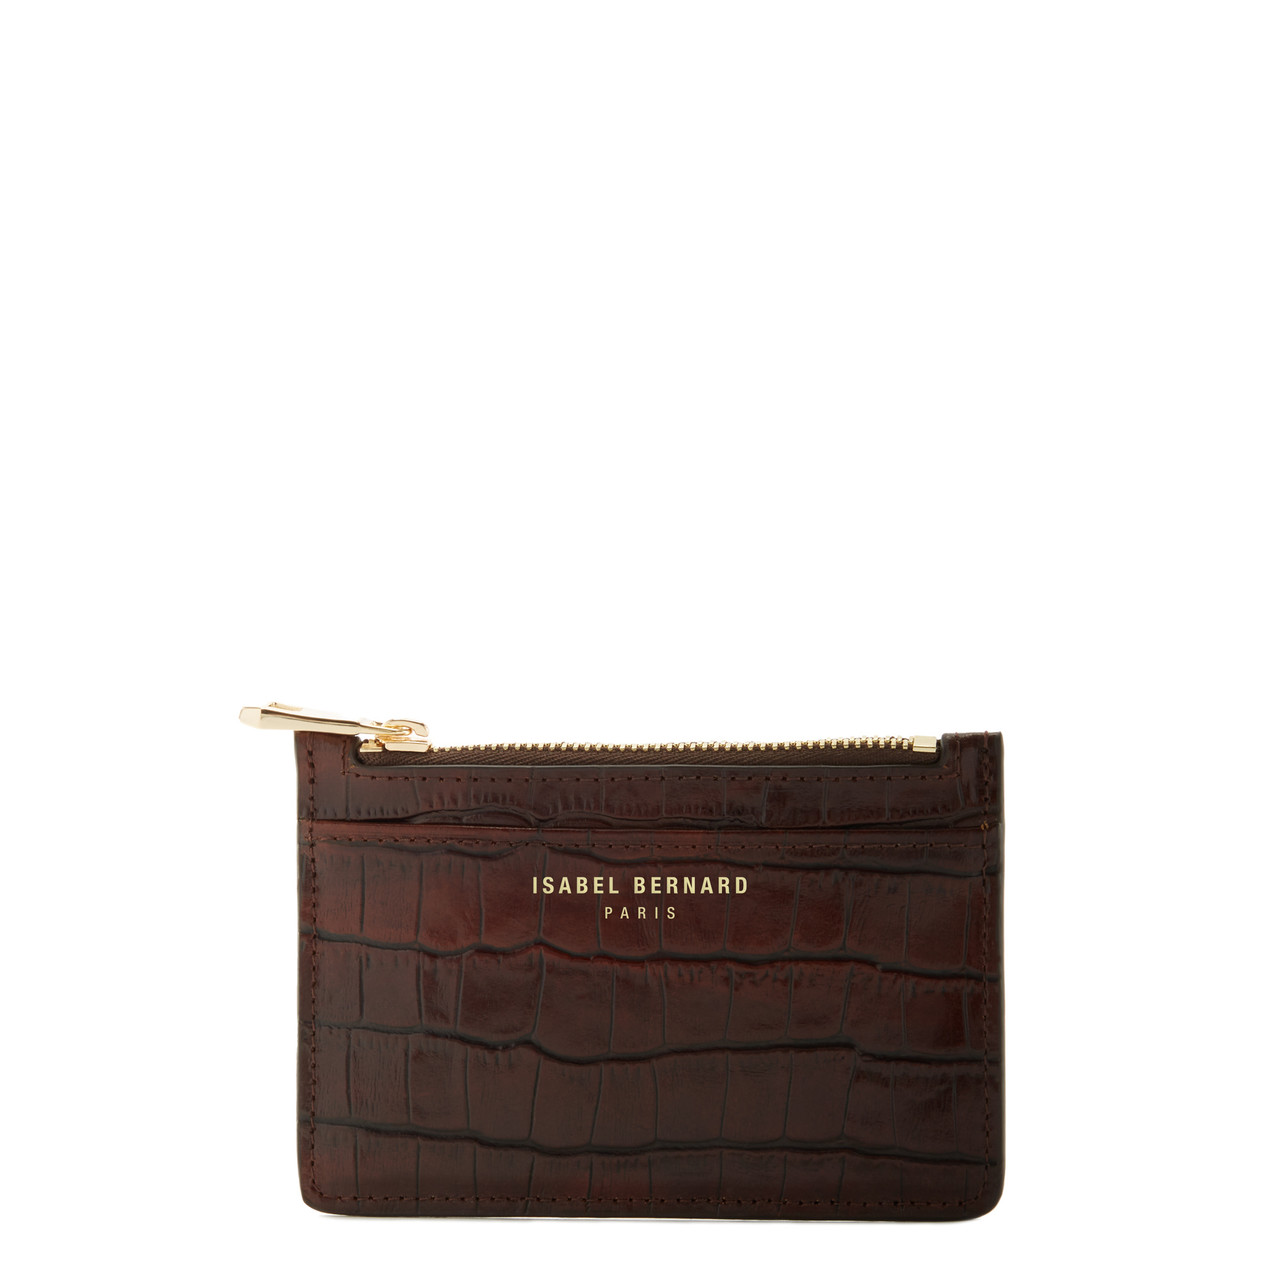 Leather Wallets for Men - Save up to 50% Off at Aspinal